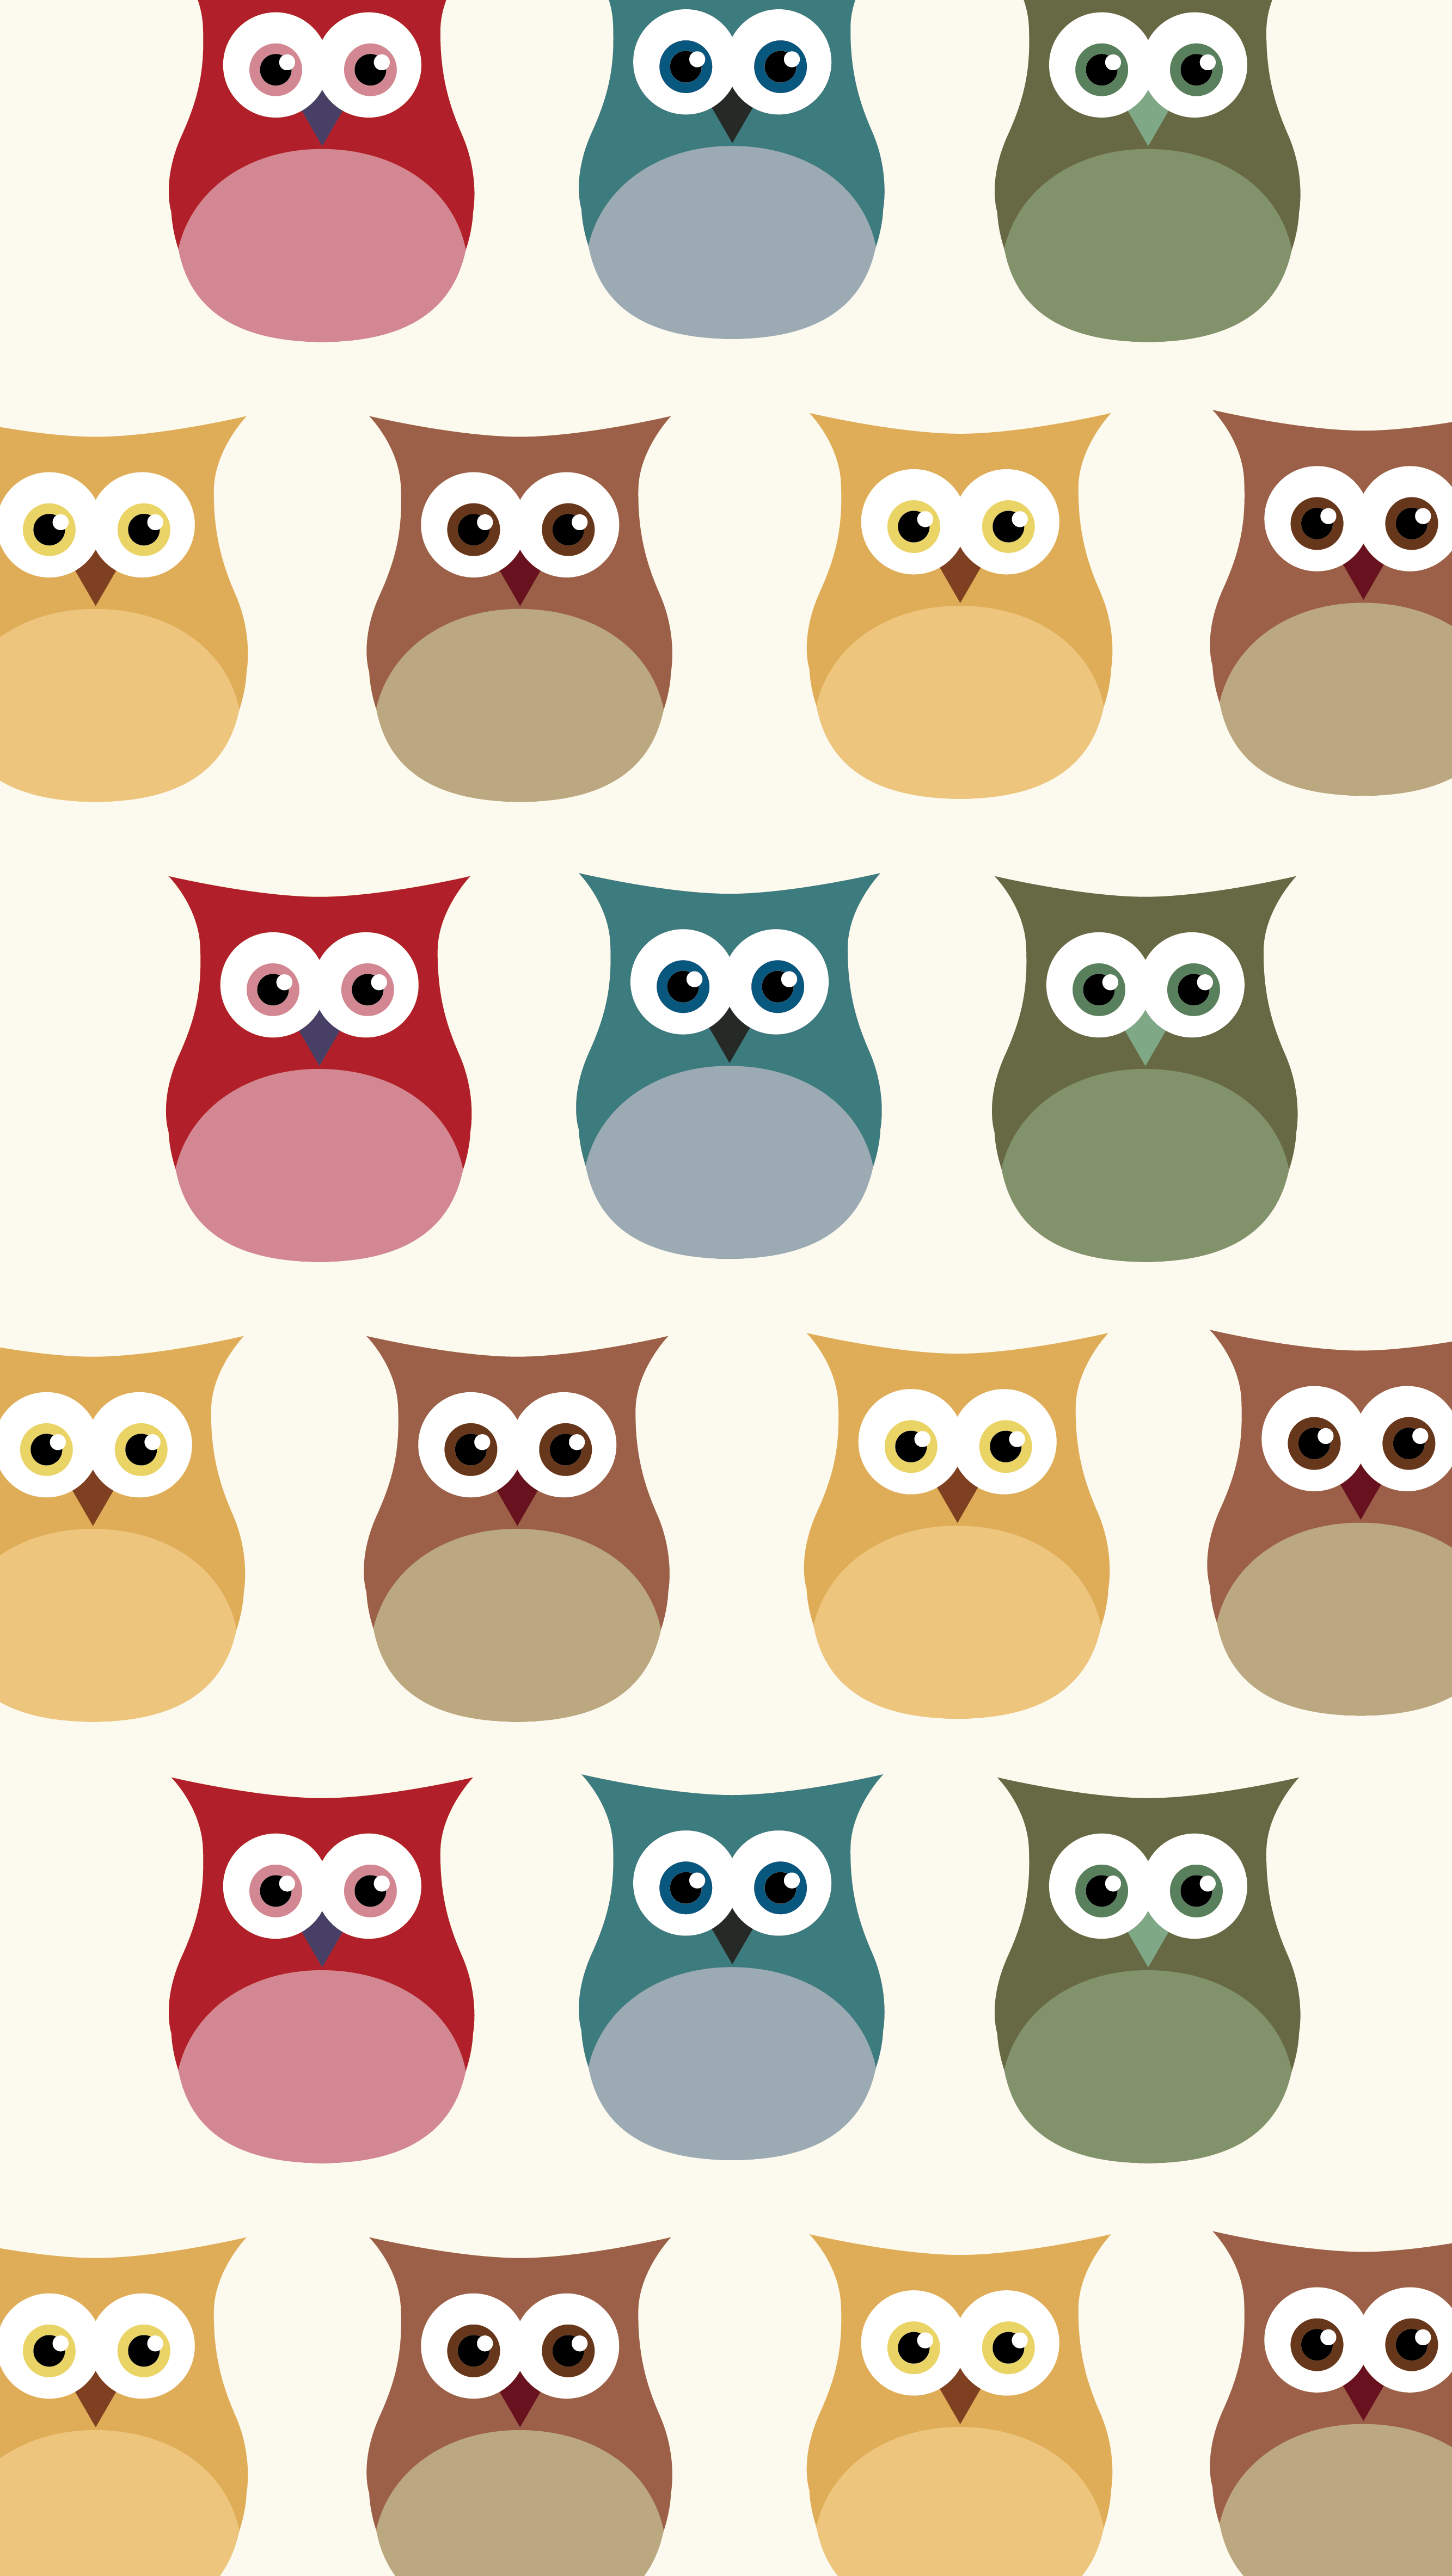 Cute iPhone Background Wallpaper. I HD Image